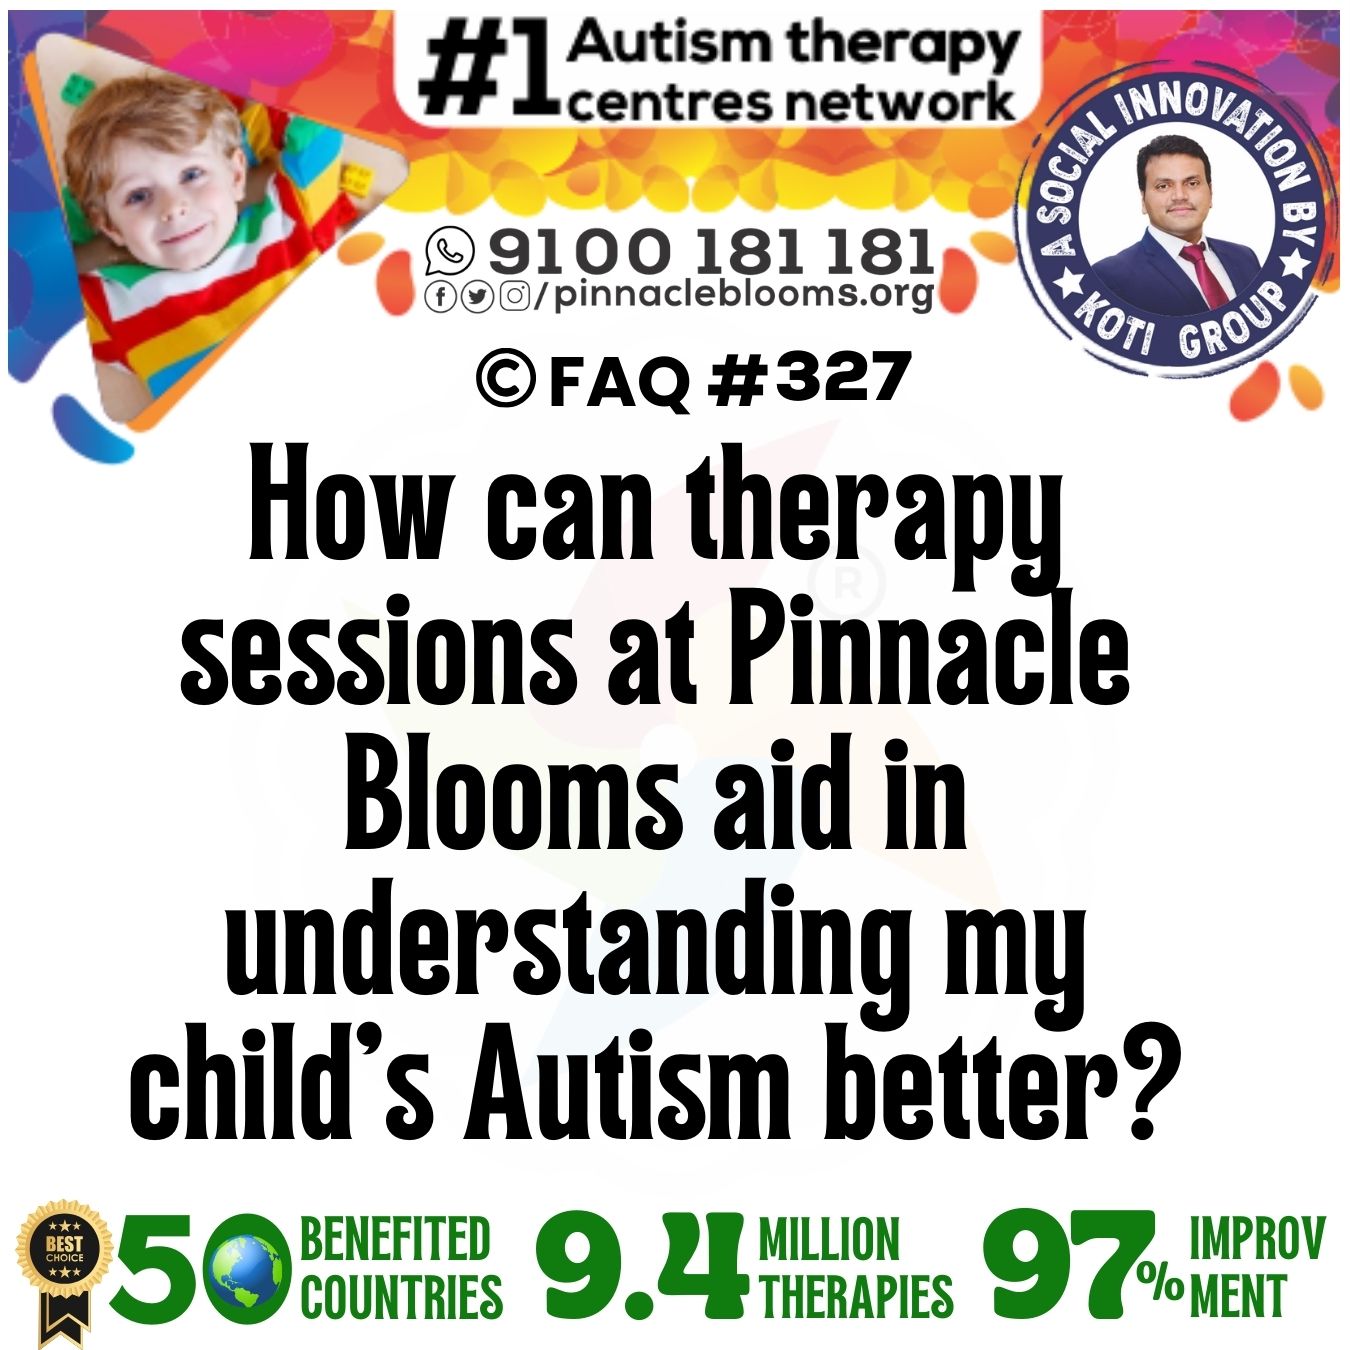 How can therapy sessions at Pinnacle Blooms aid in understanding my child's Autism better?